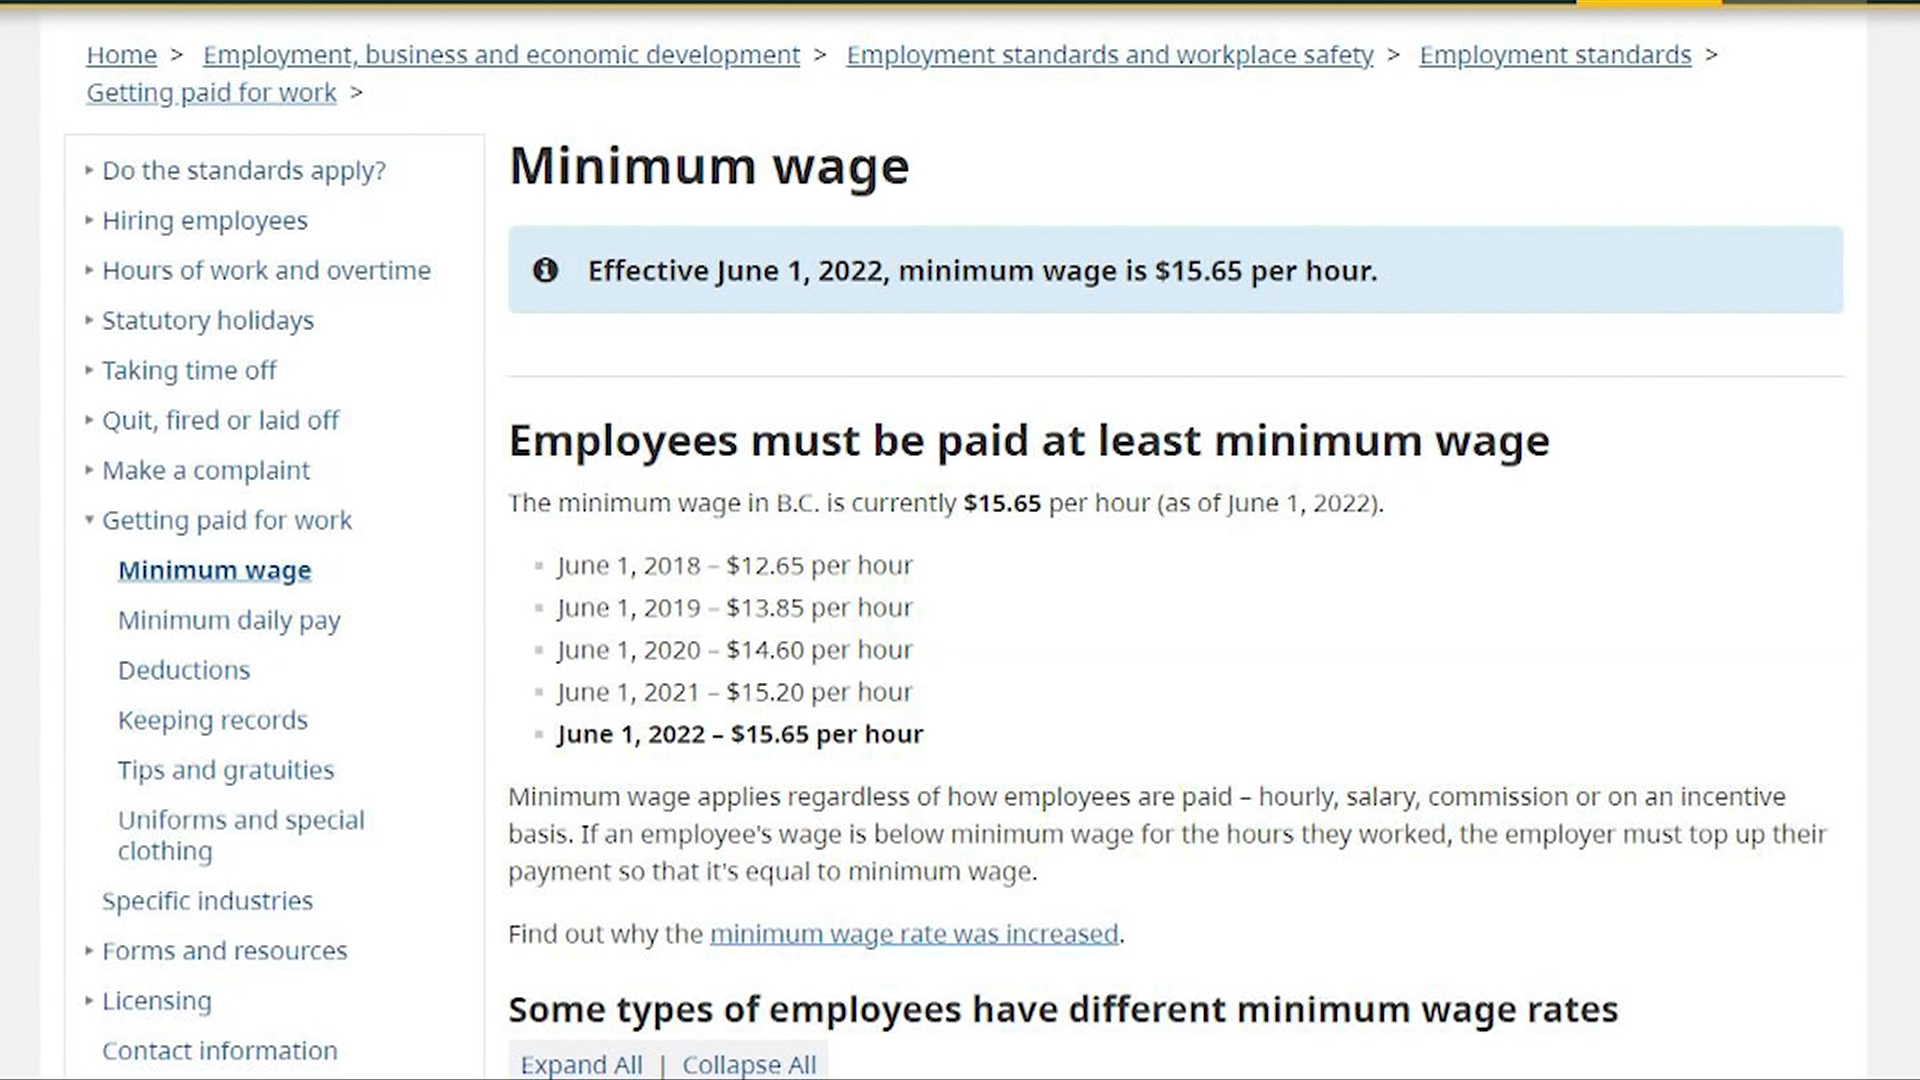 A screenshot showing the yearly minimum wage increases in B.C. 